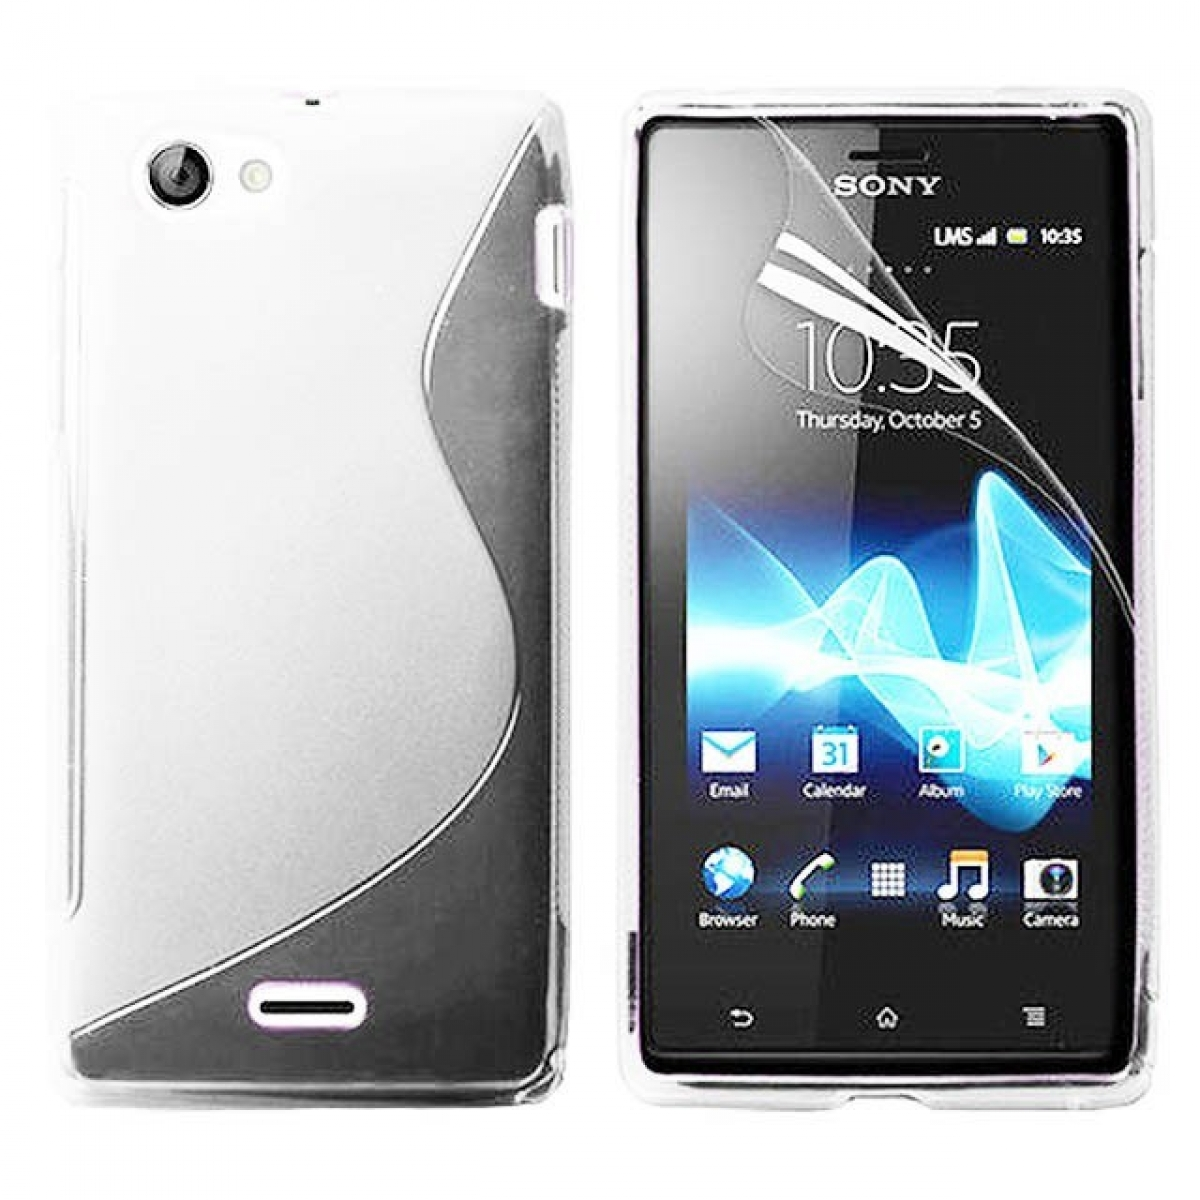 Backcover, - J, Sony, Multicolor Transparent, S-Line Xperia CASEONLINE